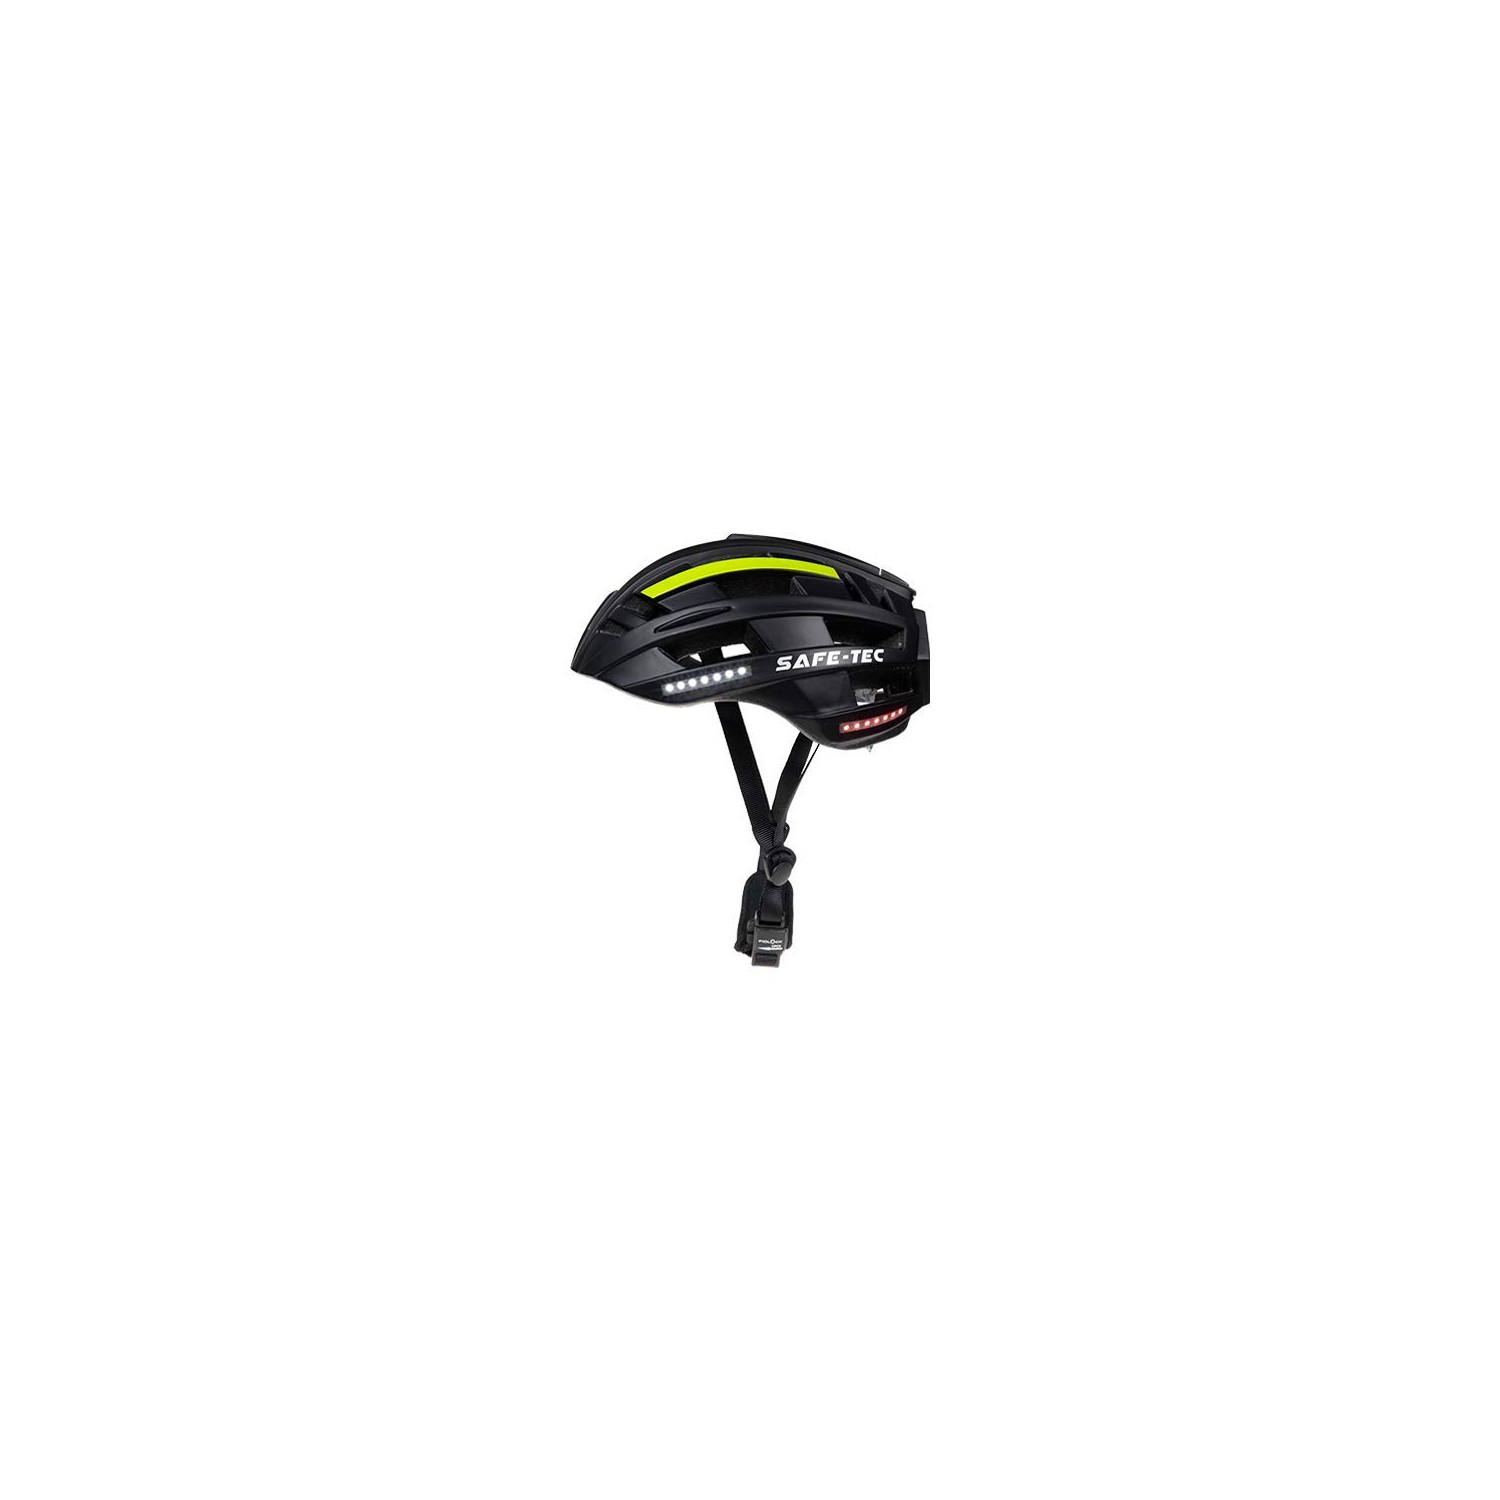 Safe-Tec Asgard Bicycle Smart Helmet with MIPS & Turn Signals and Bone Conduction Speakers (Black Green, Medium)